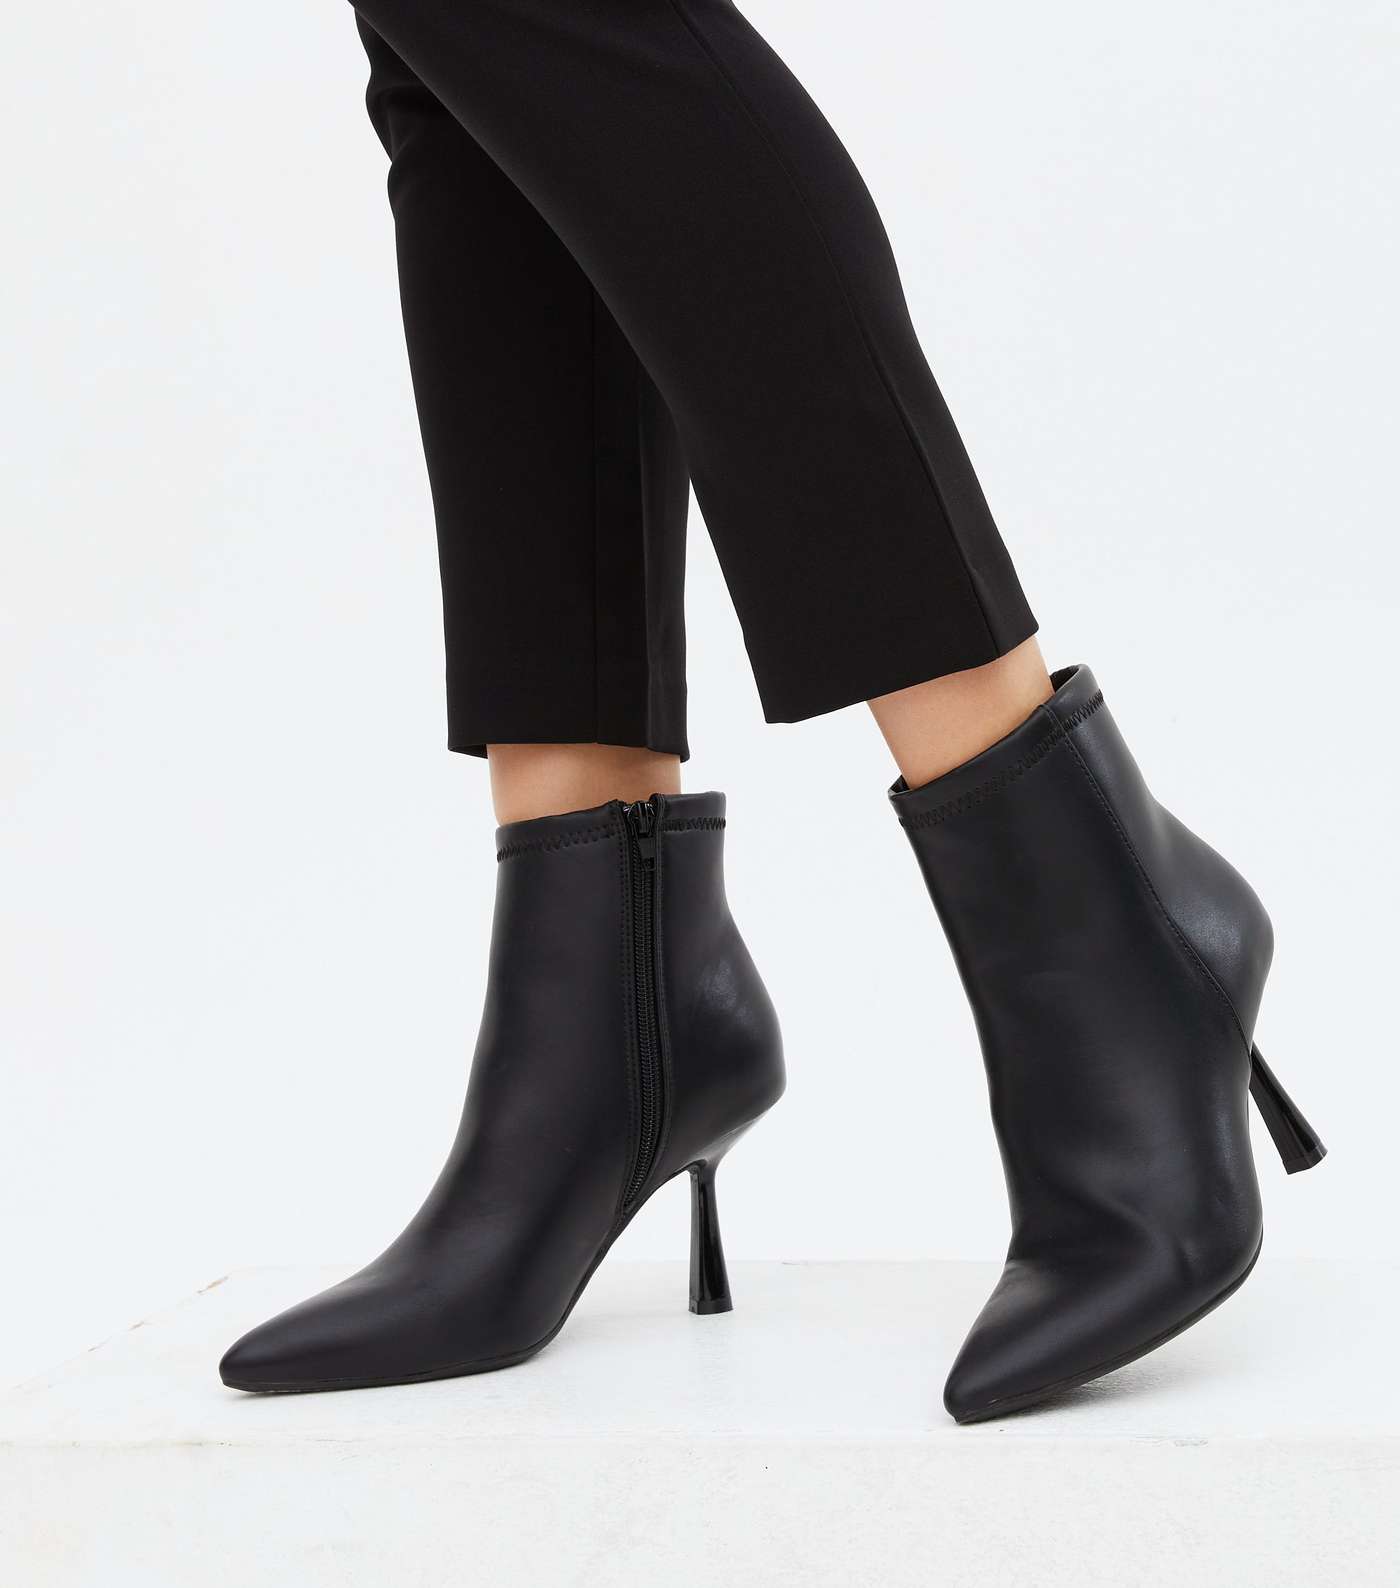 Black Pointed Stiletto Heel Sock Boots Image 2